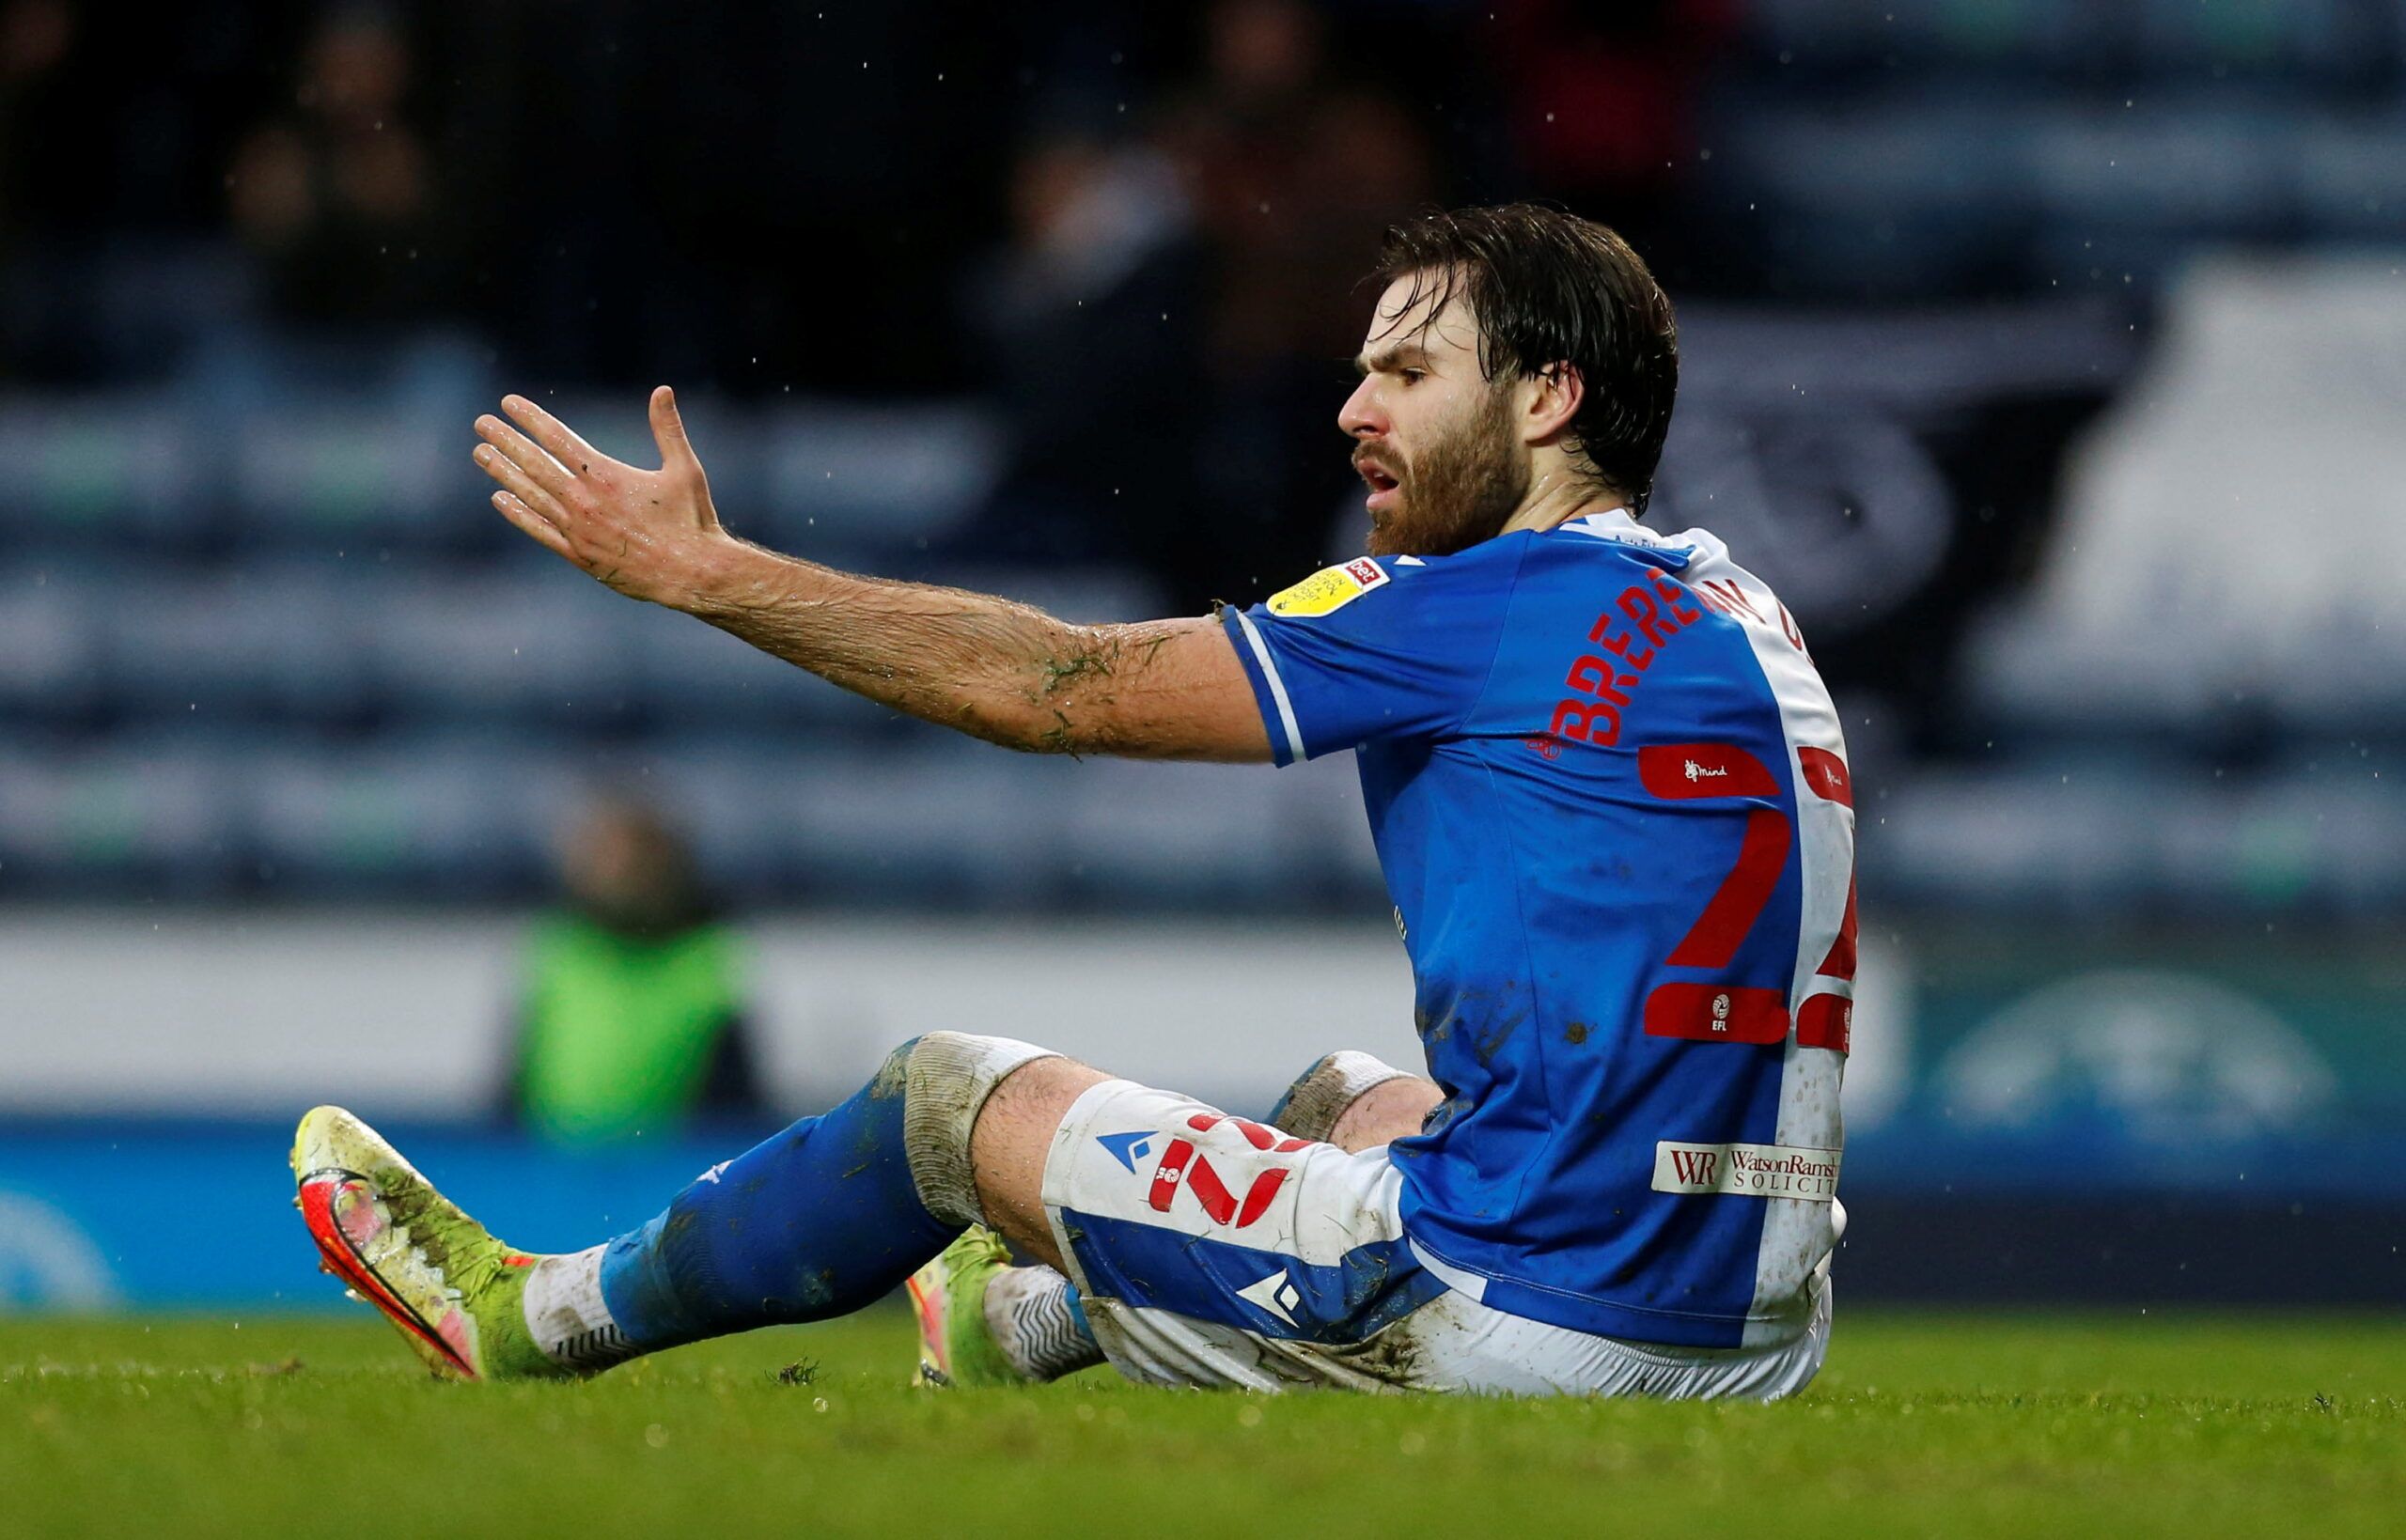 Soccer Football - Championship - Blackburn Rovers v Huddersfield Town - Ewood Park, Blackburn, Britain - January 2, 2022 Blackburn Rovers' Ben Brereton Diaz reacts   Action Images/Ed Sykes  EDITORIAL USE ONLY. No use with unauthorized audio, video, data, fixture lists, club/league logos or 